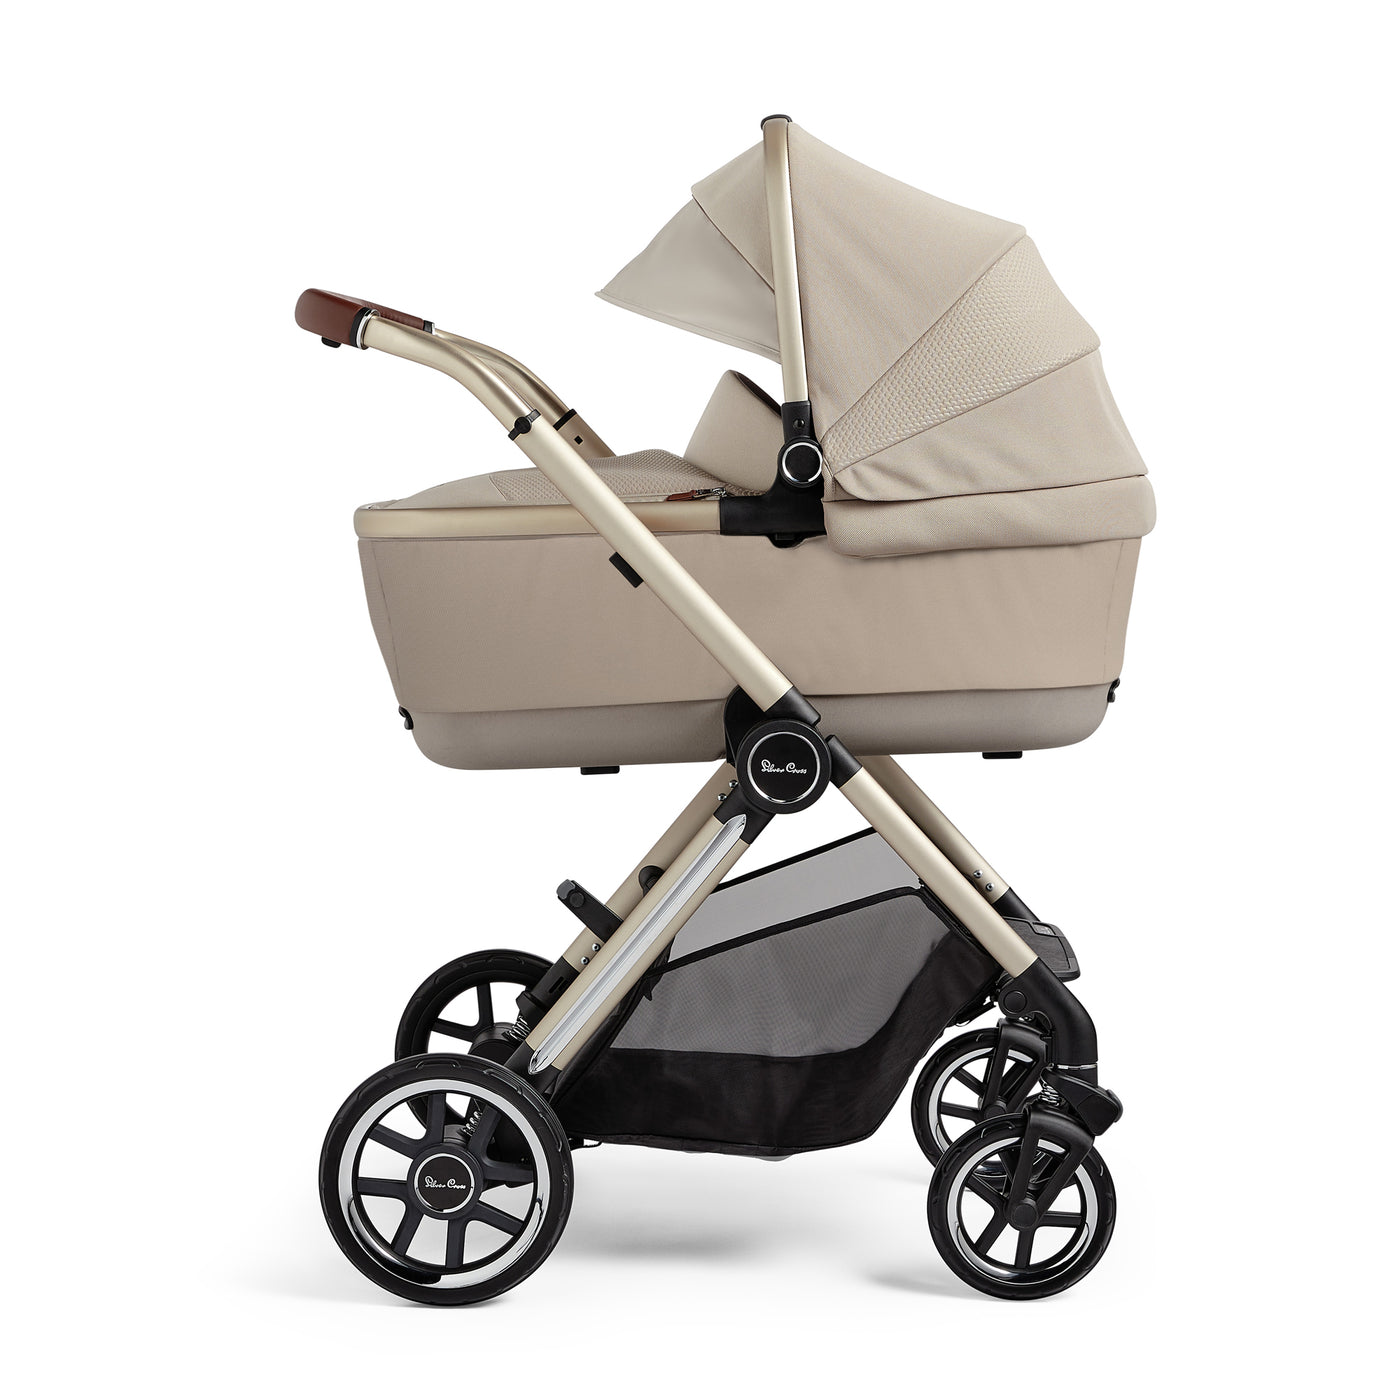 Silver Cross Reef Ultimate Maxi-Cosi Pebble 360 Pro Bundle with First Bed Folding Carrycot - Stone